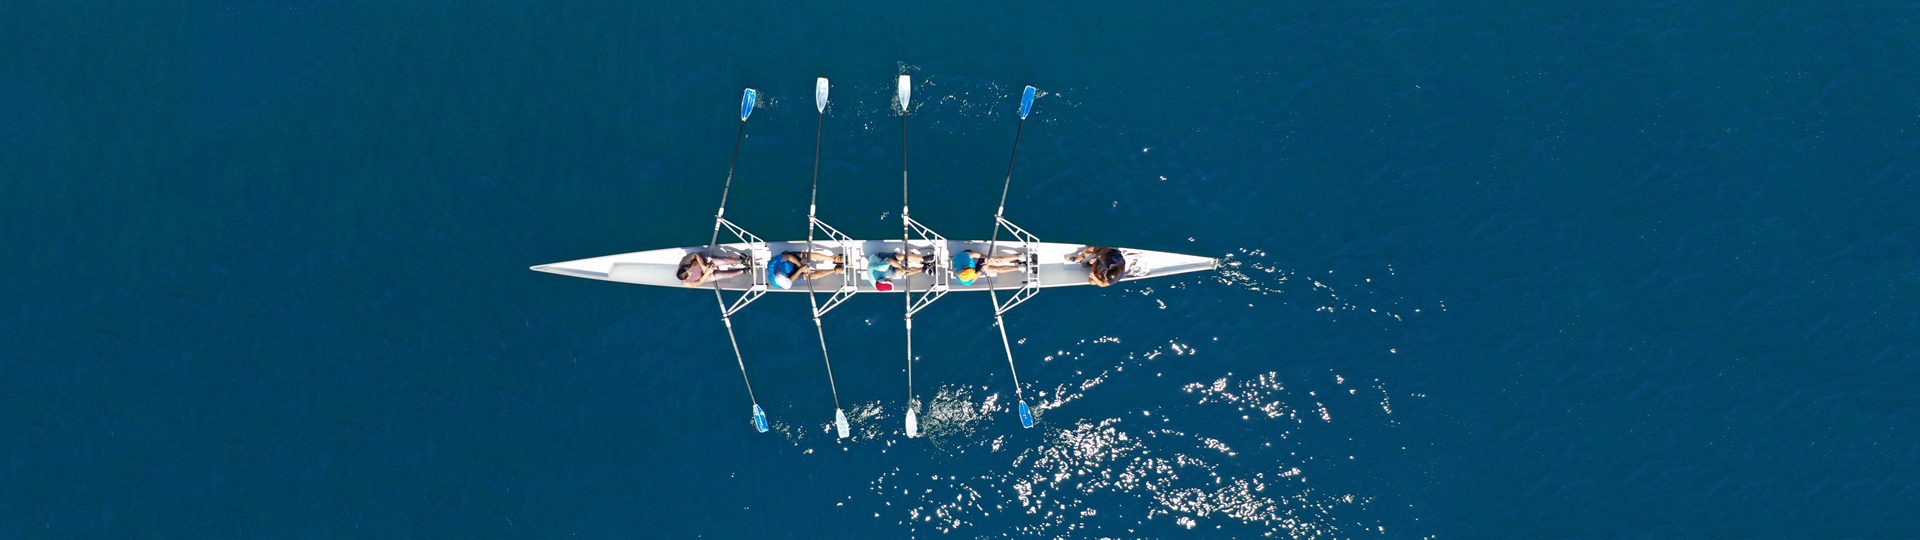 On the blue water, 4 people row in sync in a long, thin boat.